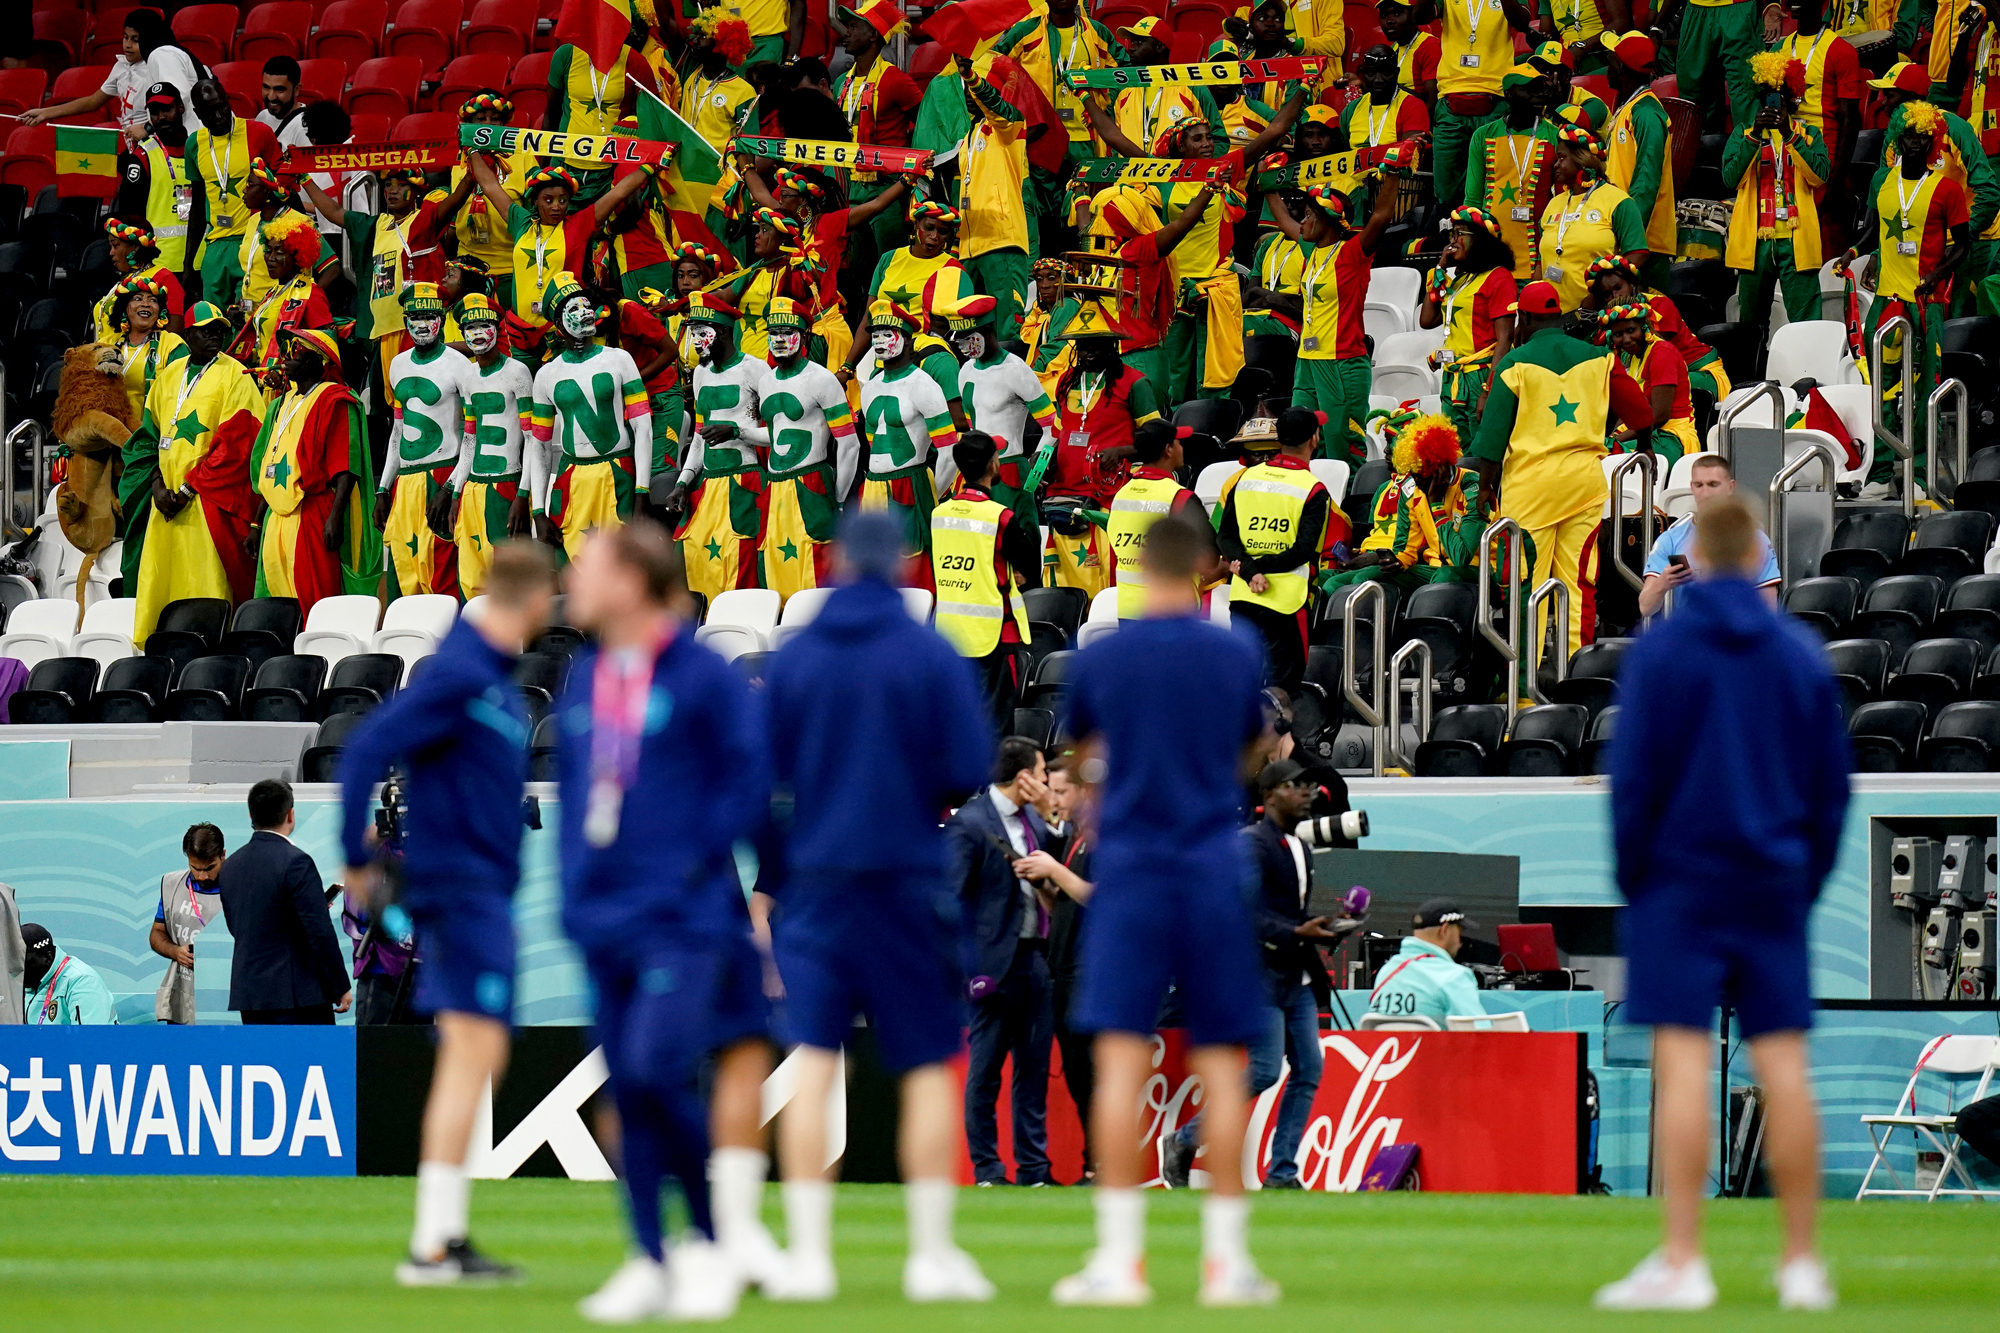 Senegal fans in the stadium before the match on Sunday.